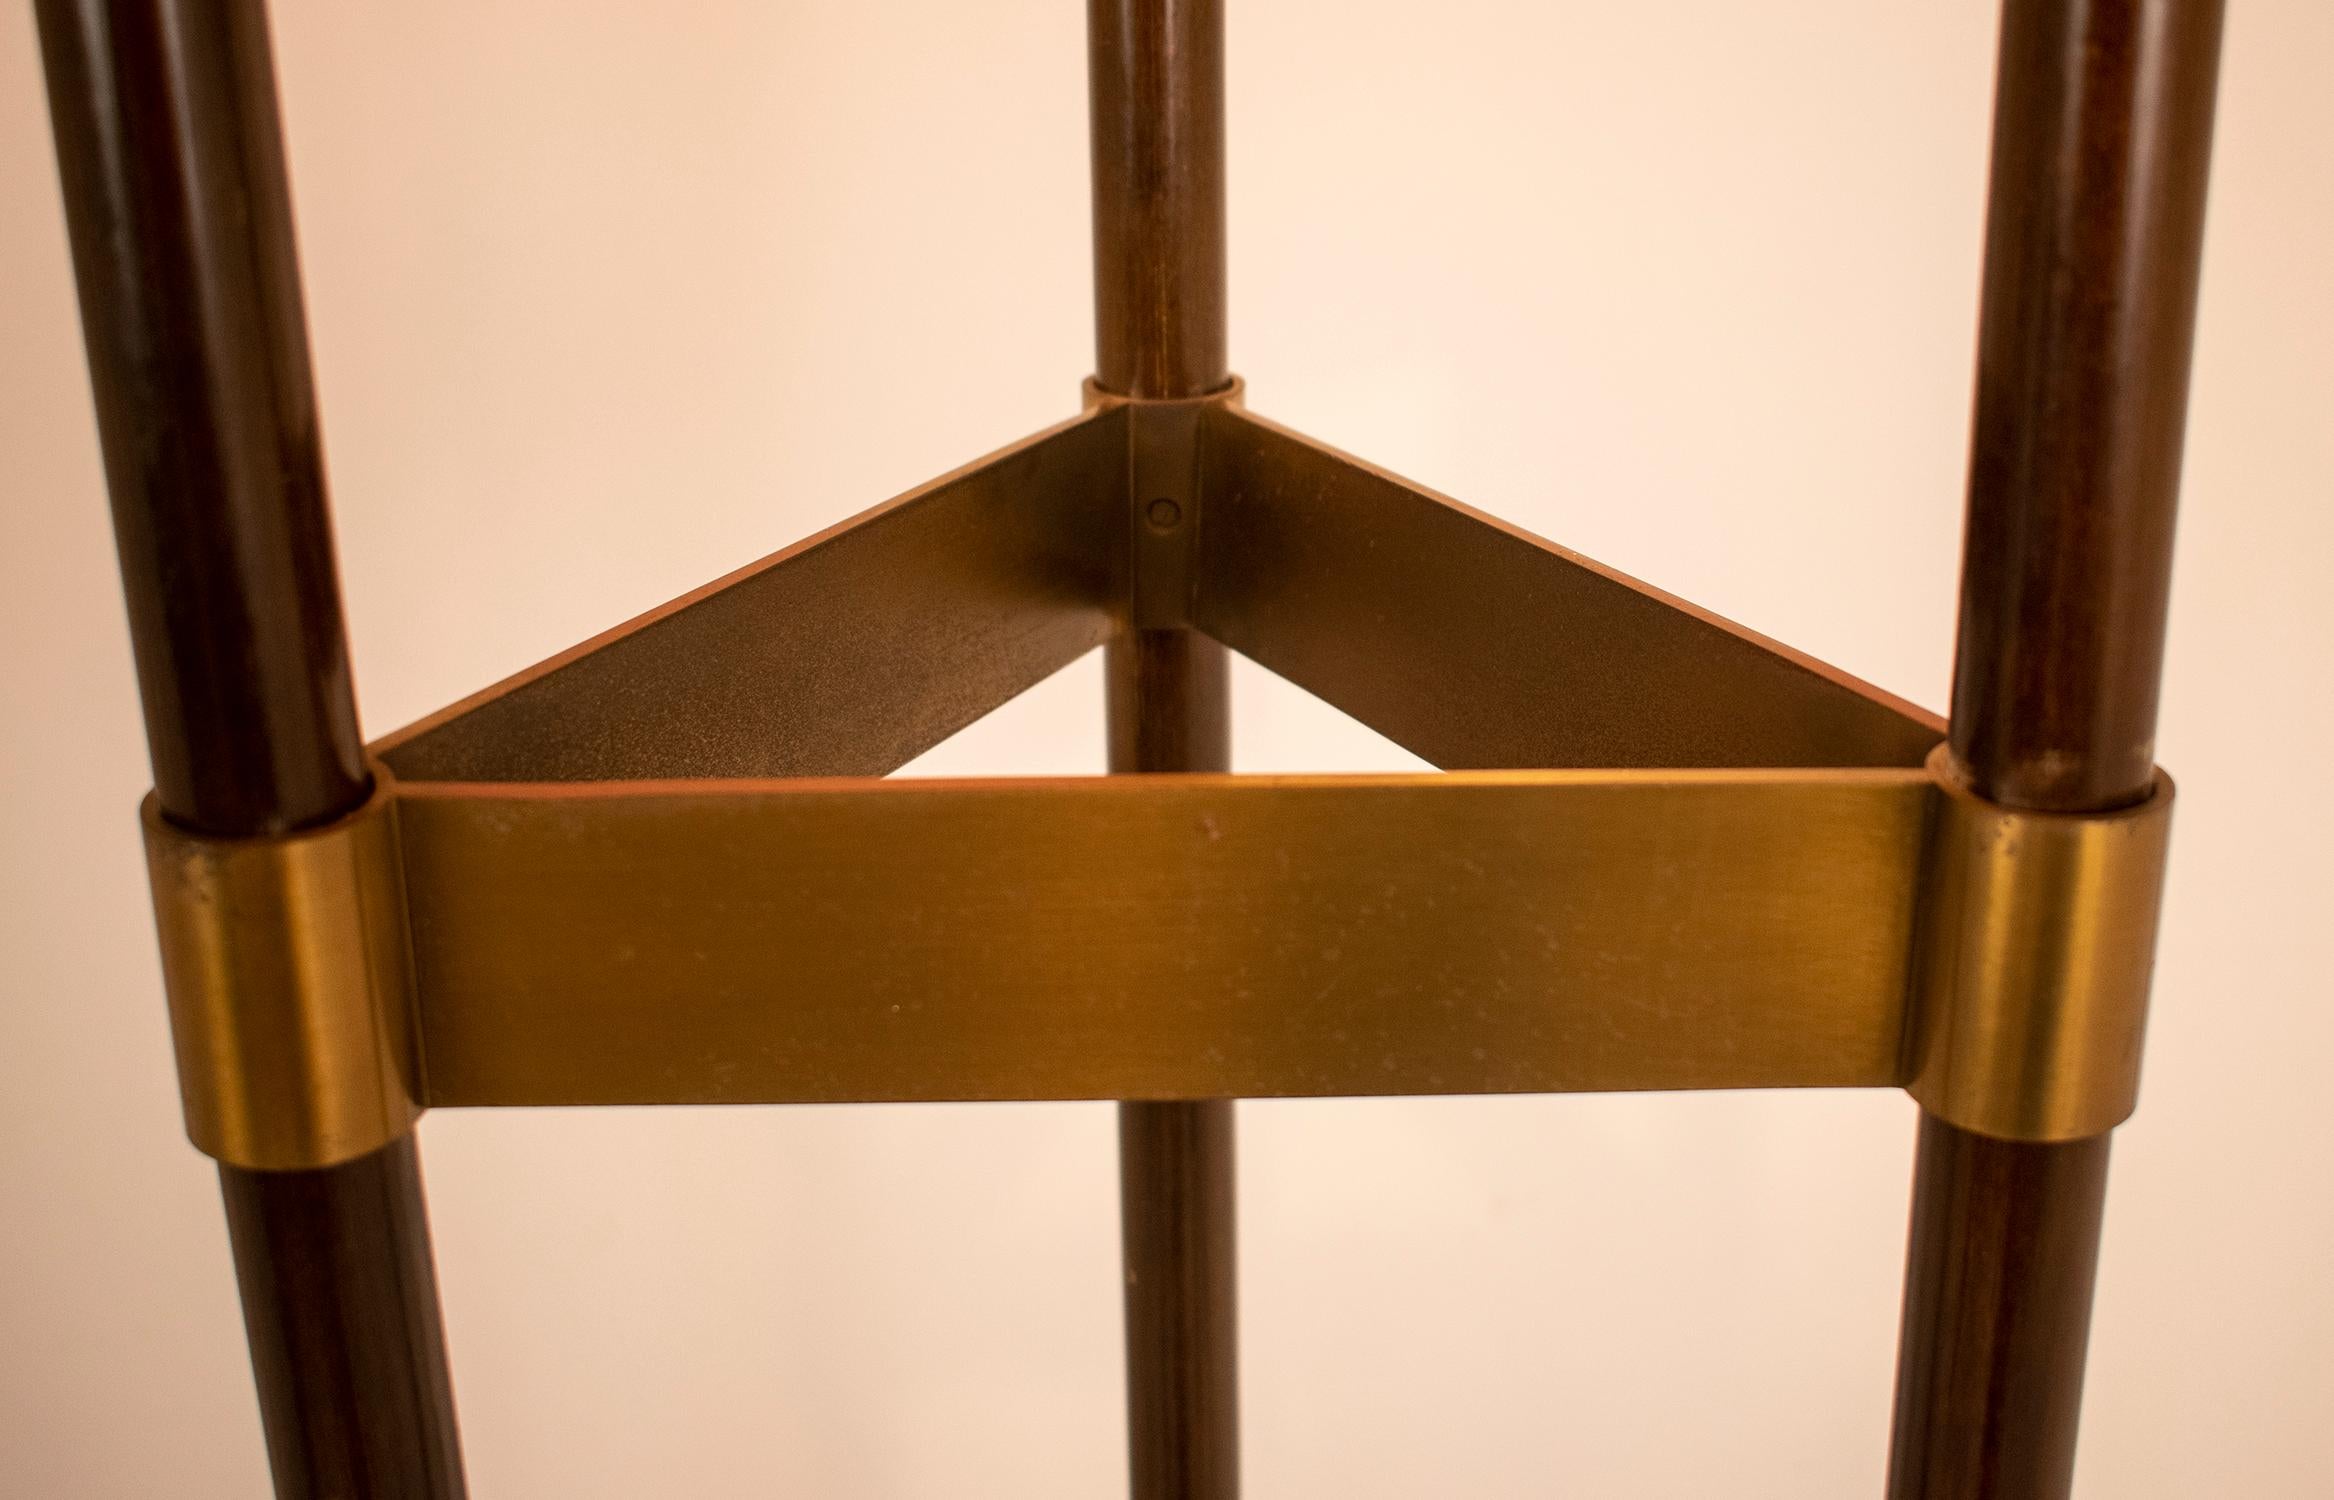 Mid-20th Century Standing Lamp by Jordi Vilanova, Solid Walnut and Solid Brass, Barcelona, 1960s